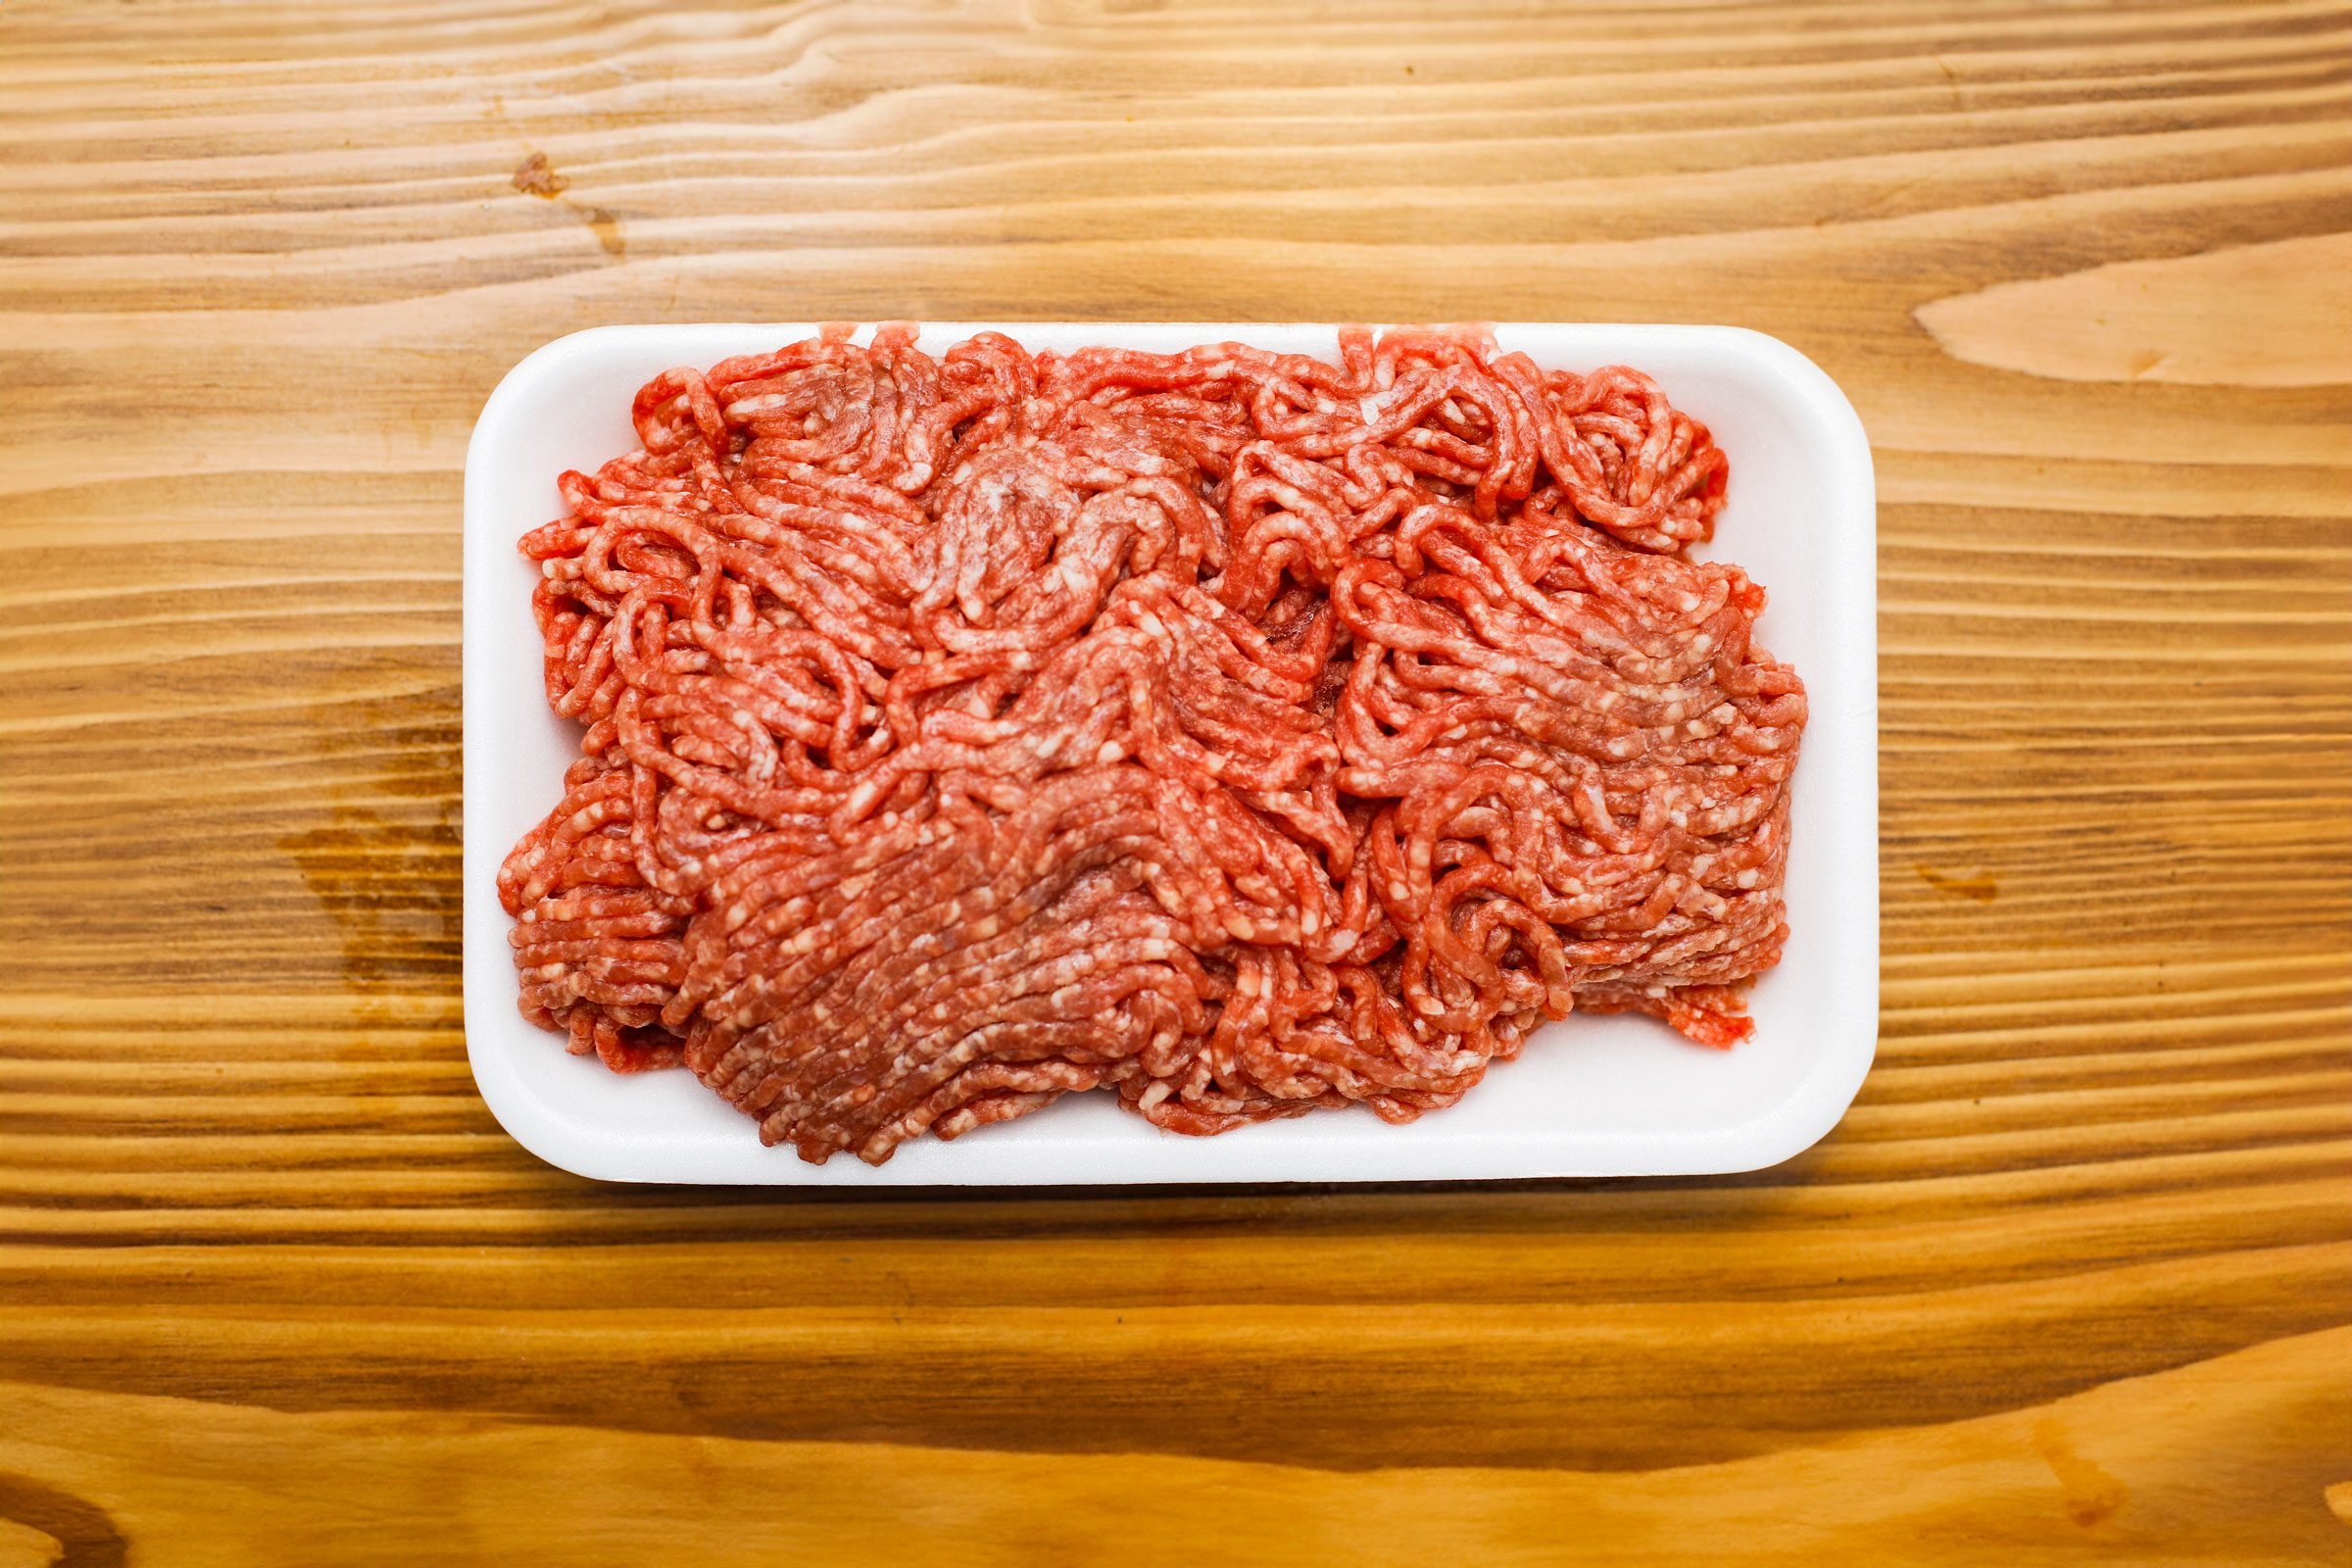 More Than 20,000 Pounds of Meat Recalled in 4 States